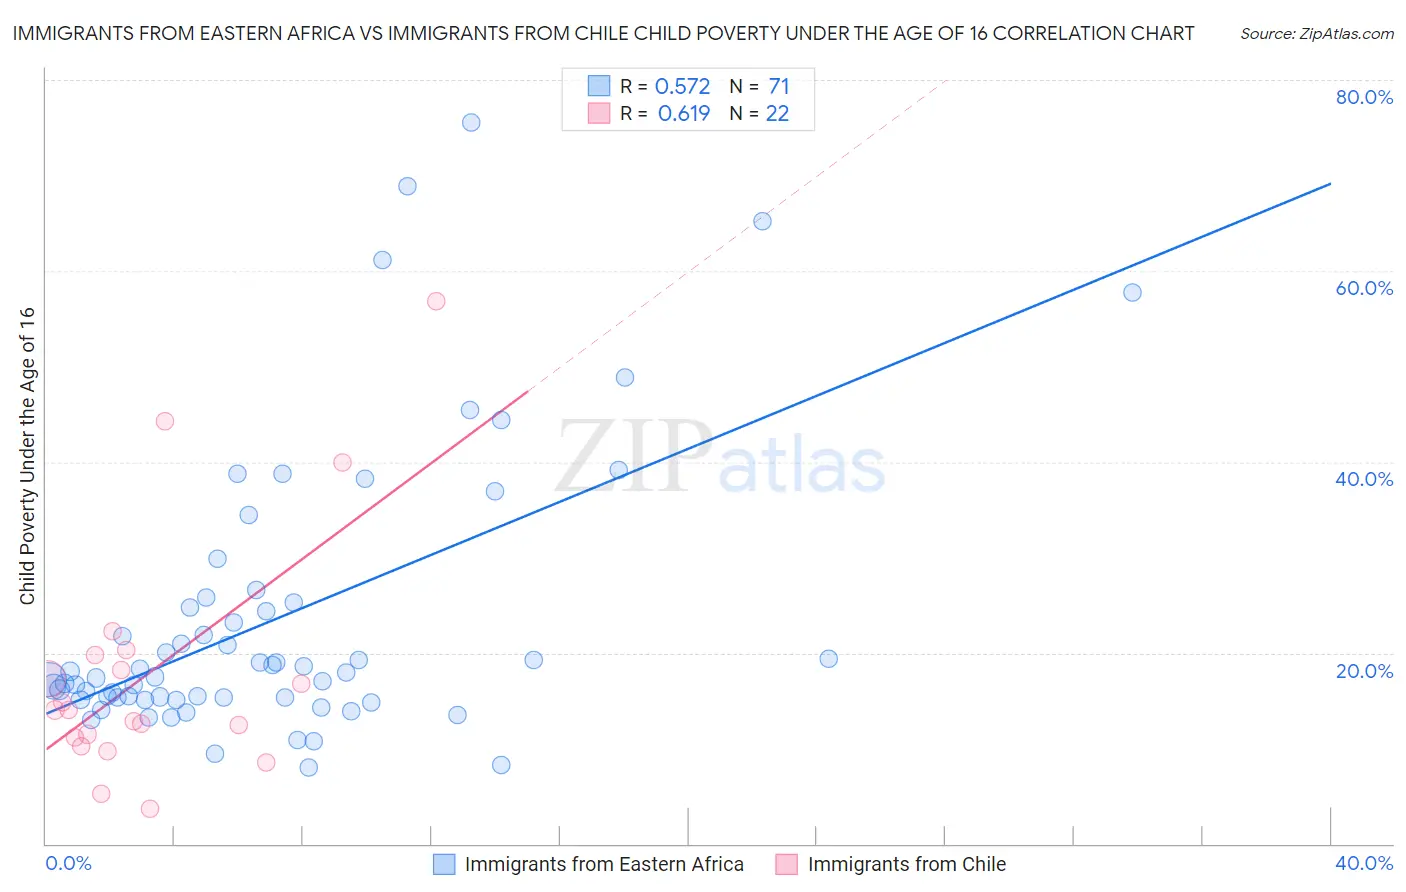 Immigrants from Eastern Africa vs Immigrants from Chile Child Poverty Under the Age of 16